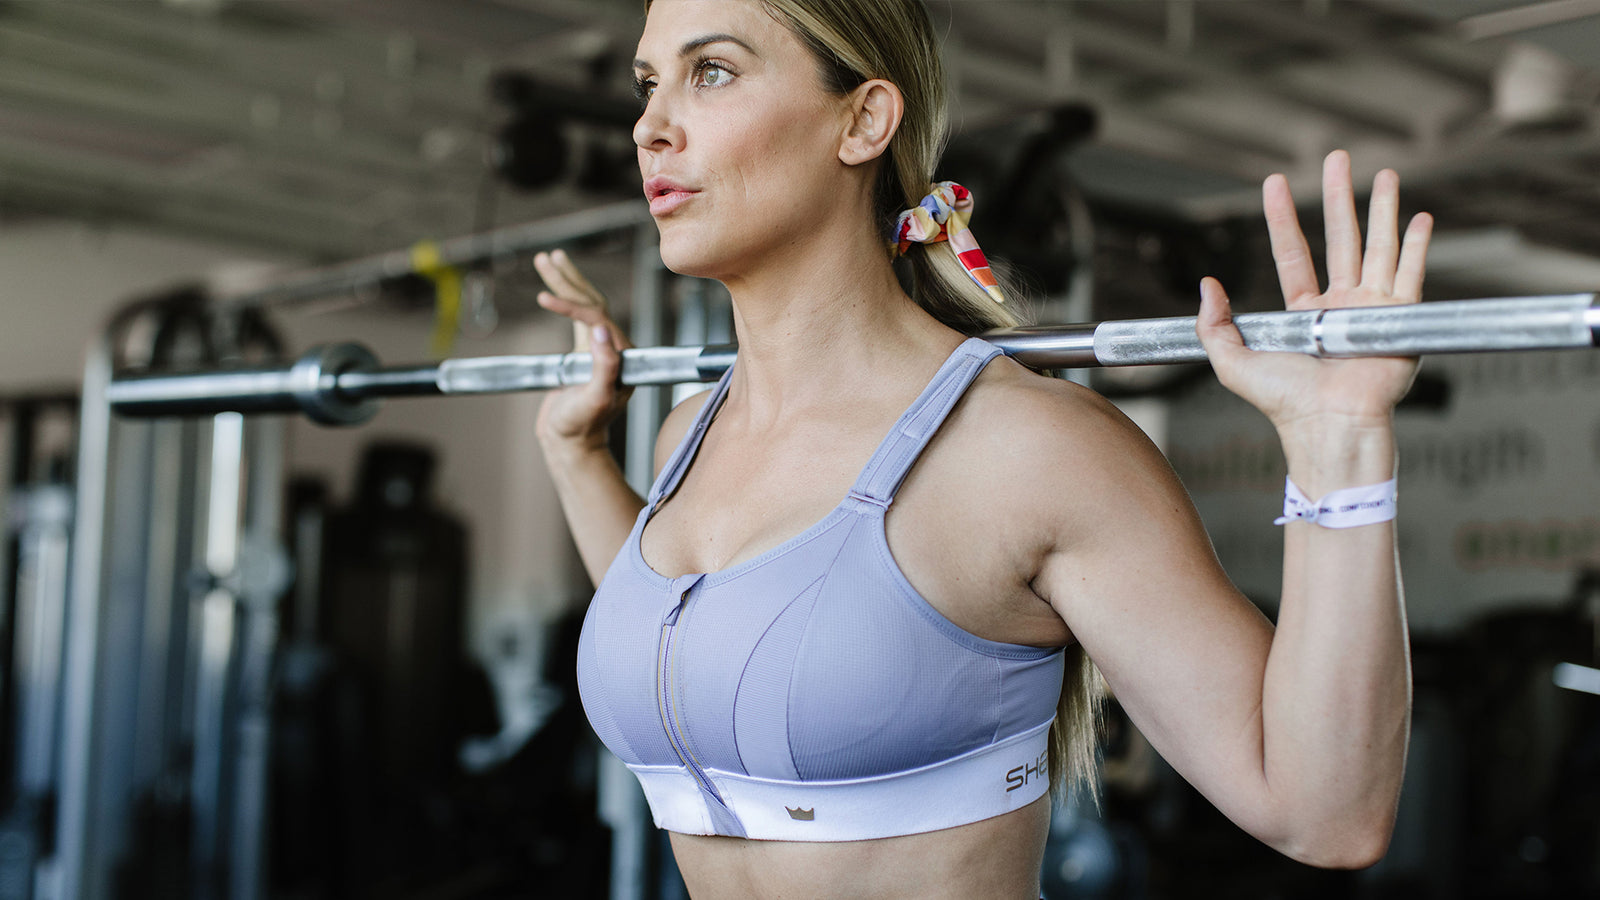 The Recent Evolution of the Sports Bra: How Lisa Lindahl and